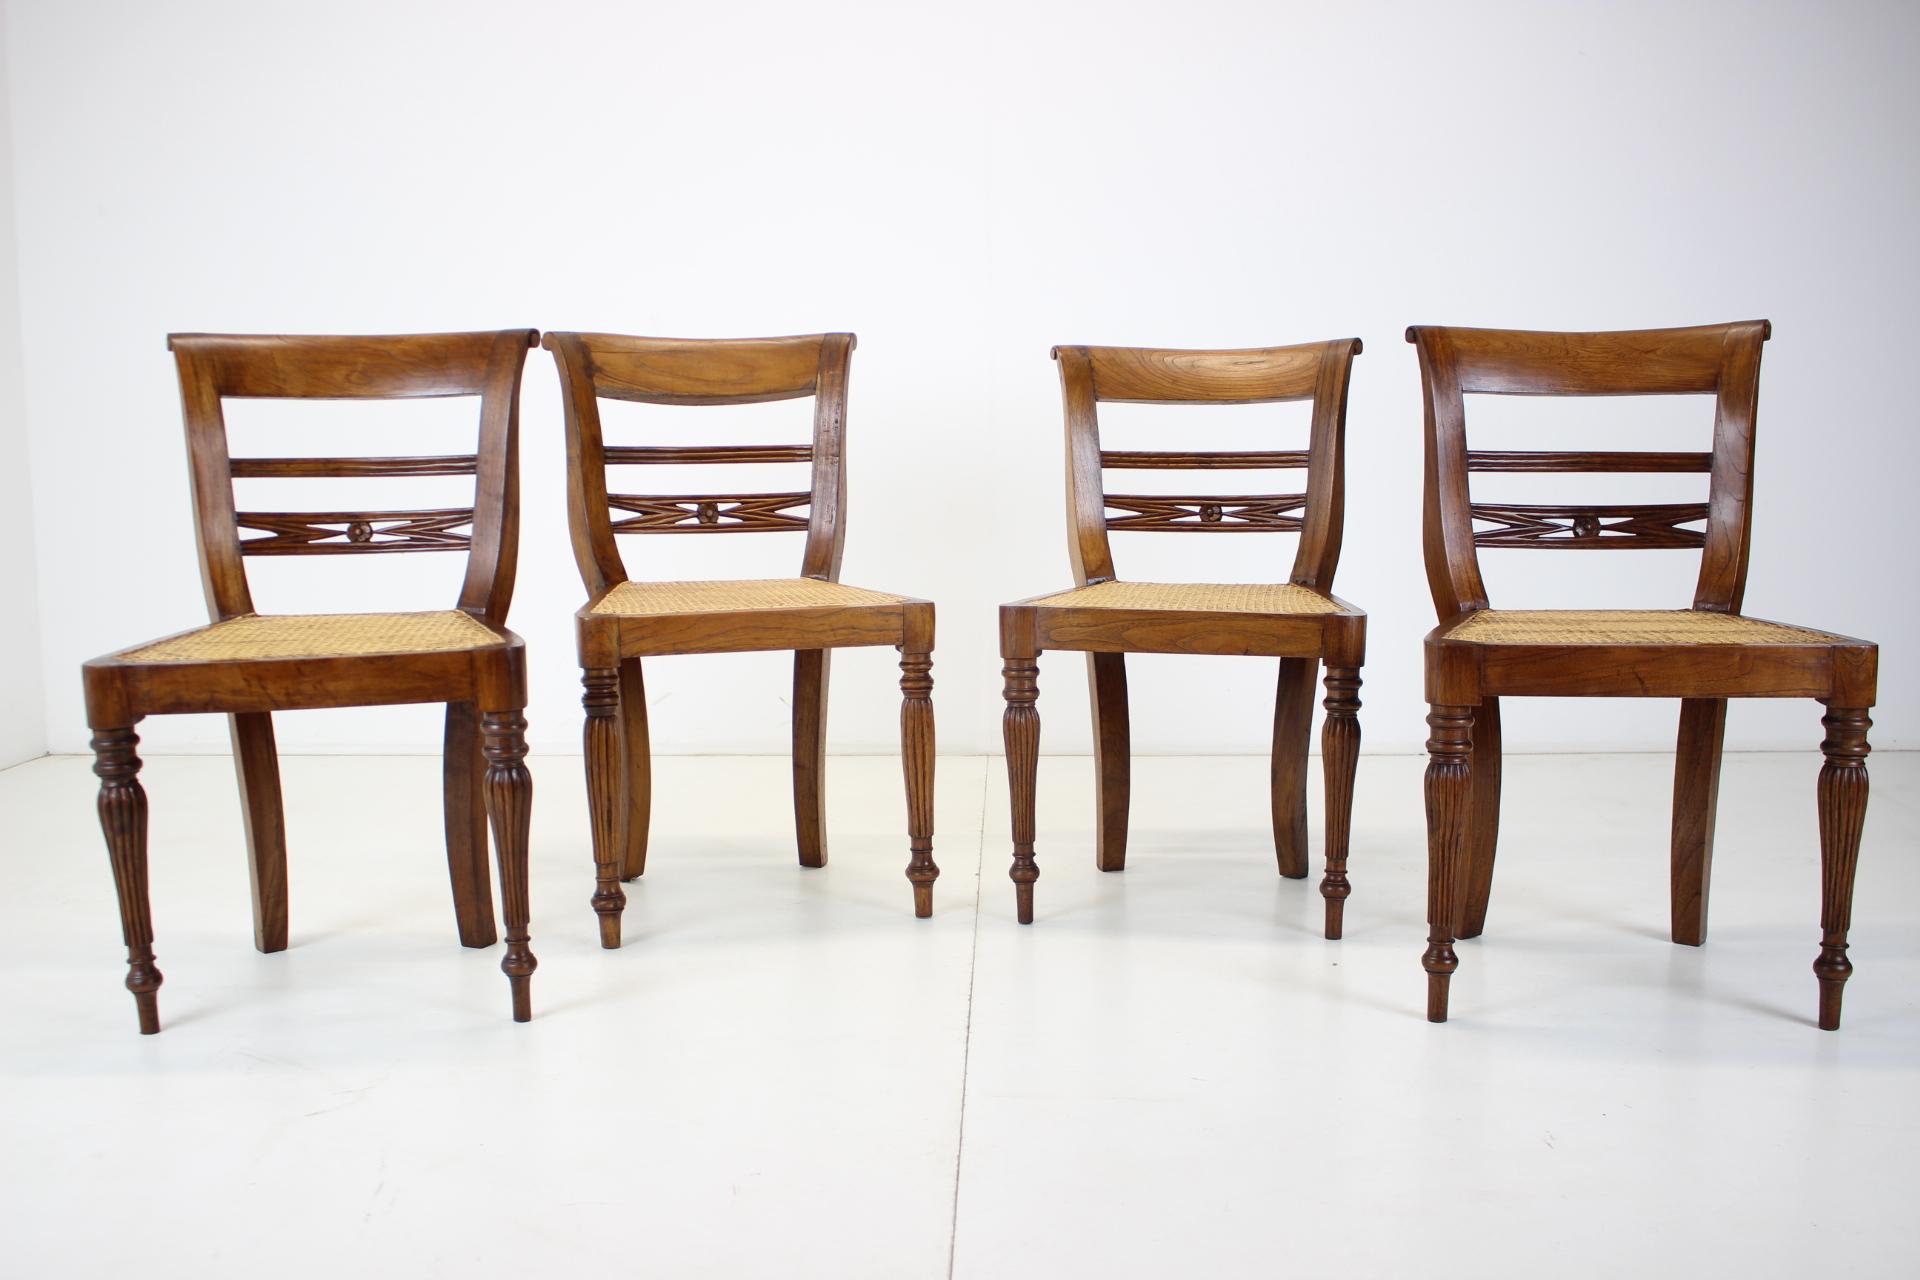 Made in Czechoslovakia.
Made of wood.
Good original condition.
Made of walnut wood.
Solid wood.
One chair has a slightly different front two legs.